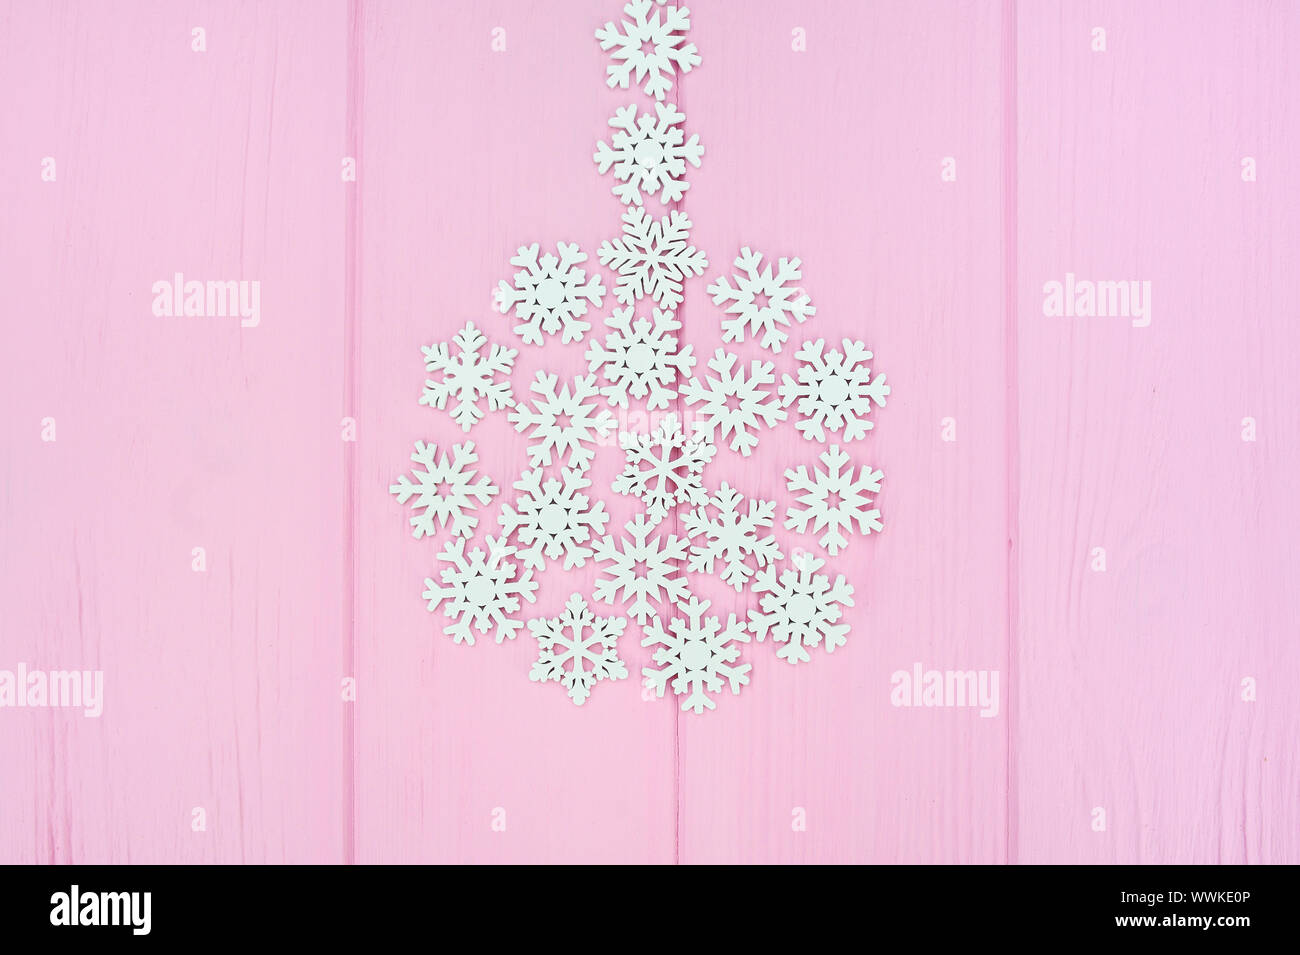 Stylized Christmas ball made from white wooden snowflakes on pink wooden background with place for text. Concept for xmas greeting card, New Year Stock Photo